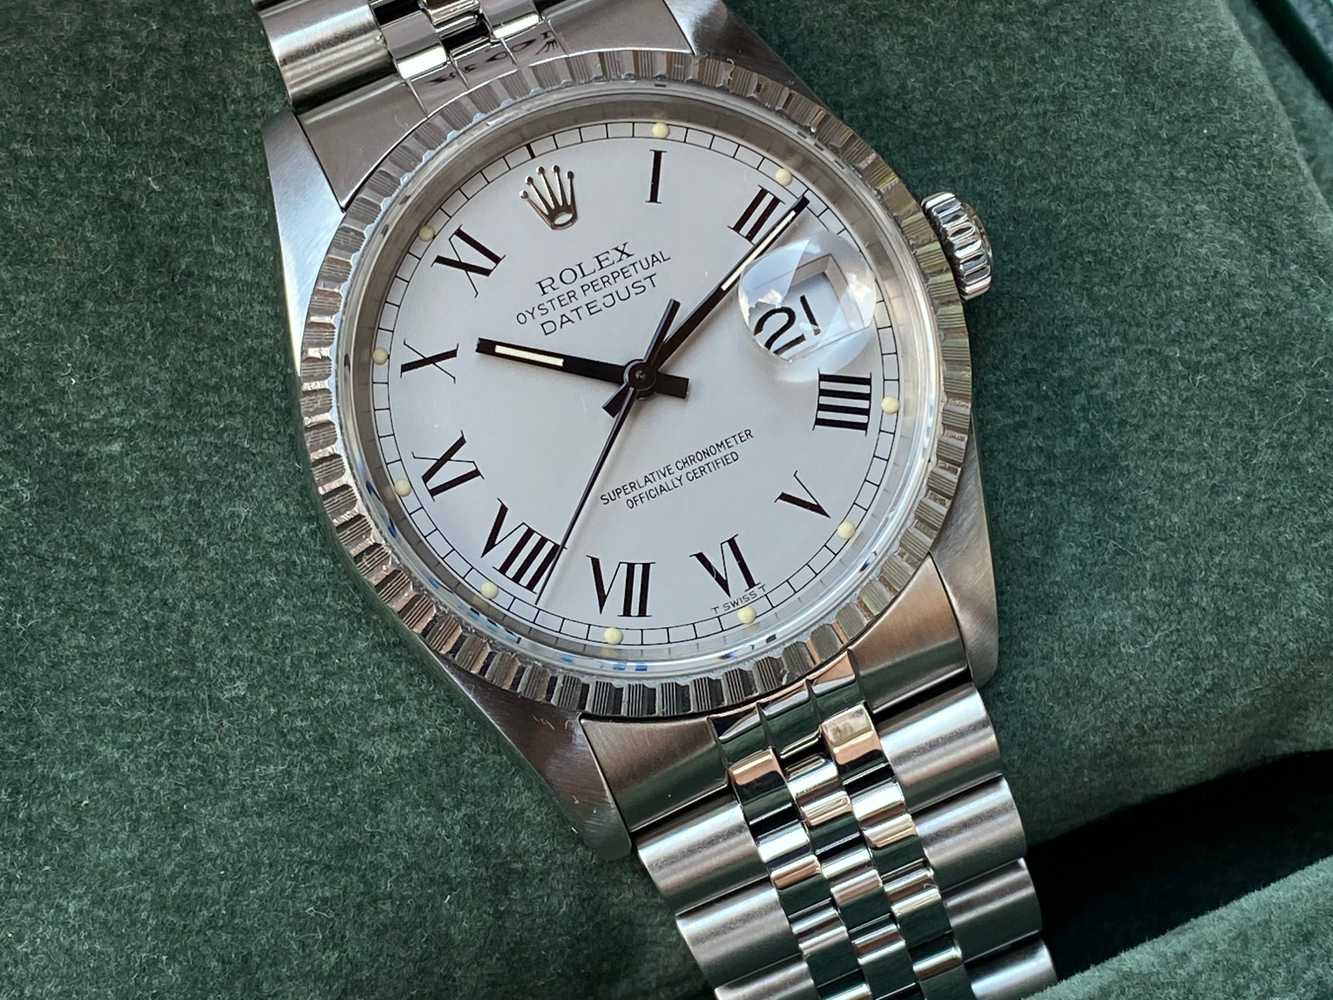 The Rolex Buckley Dial